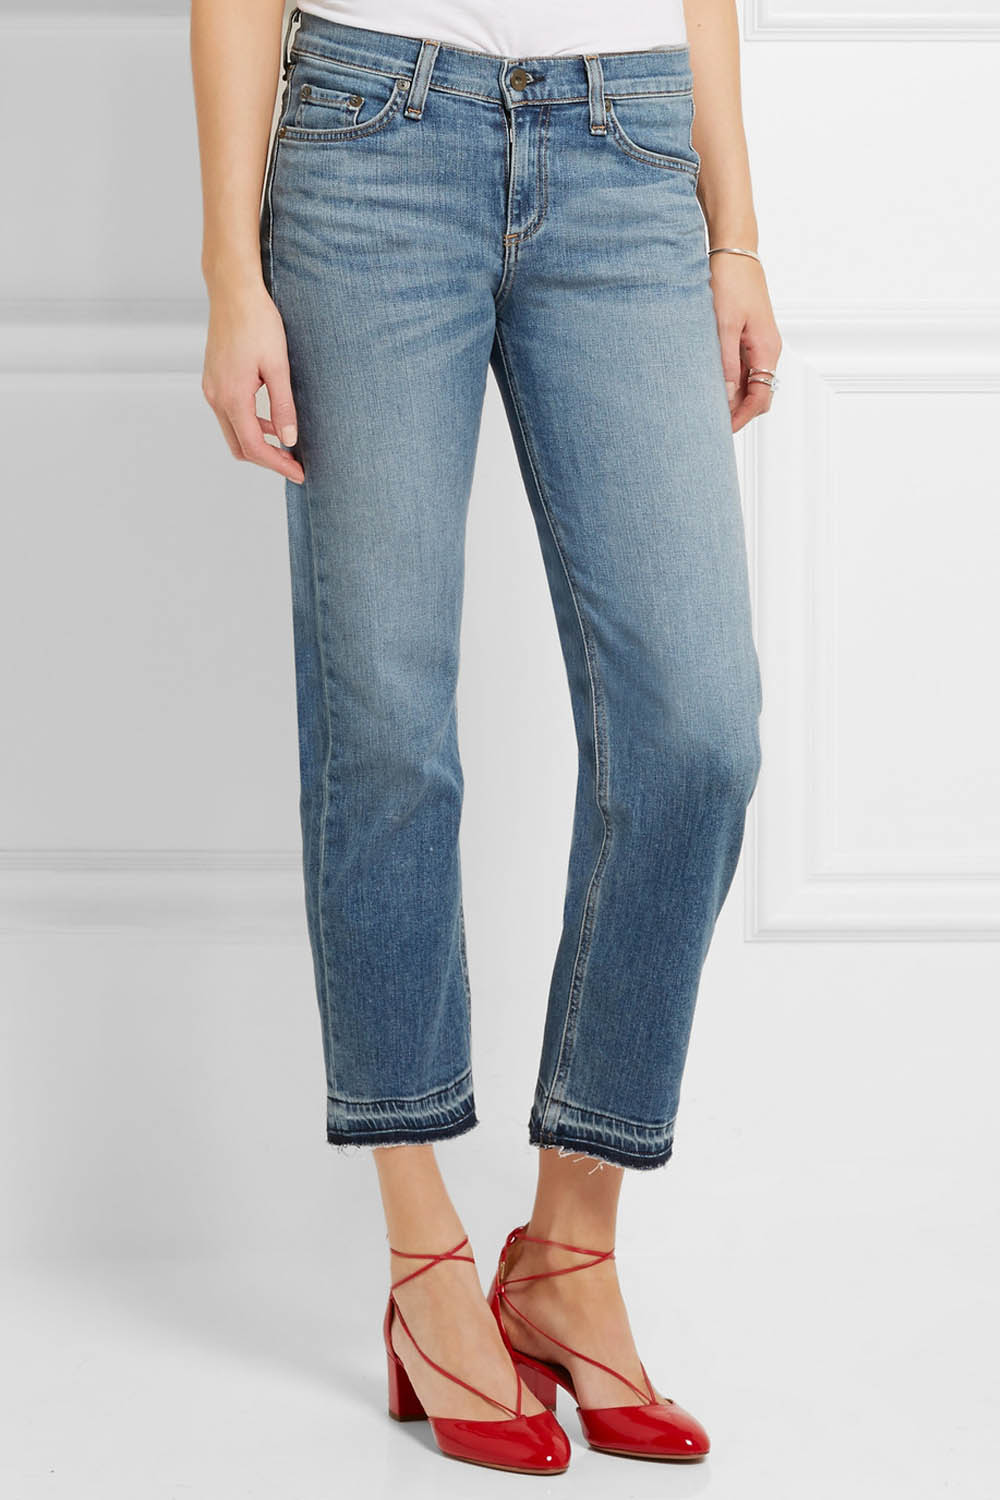 Rag and Bone jeans, approx $394, from Net-a-porter.